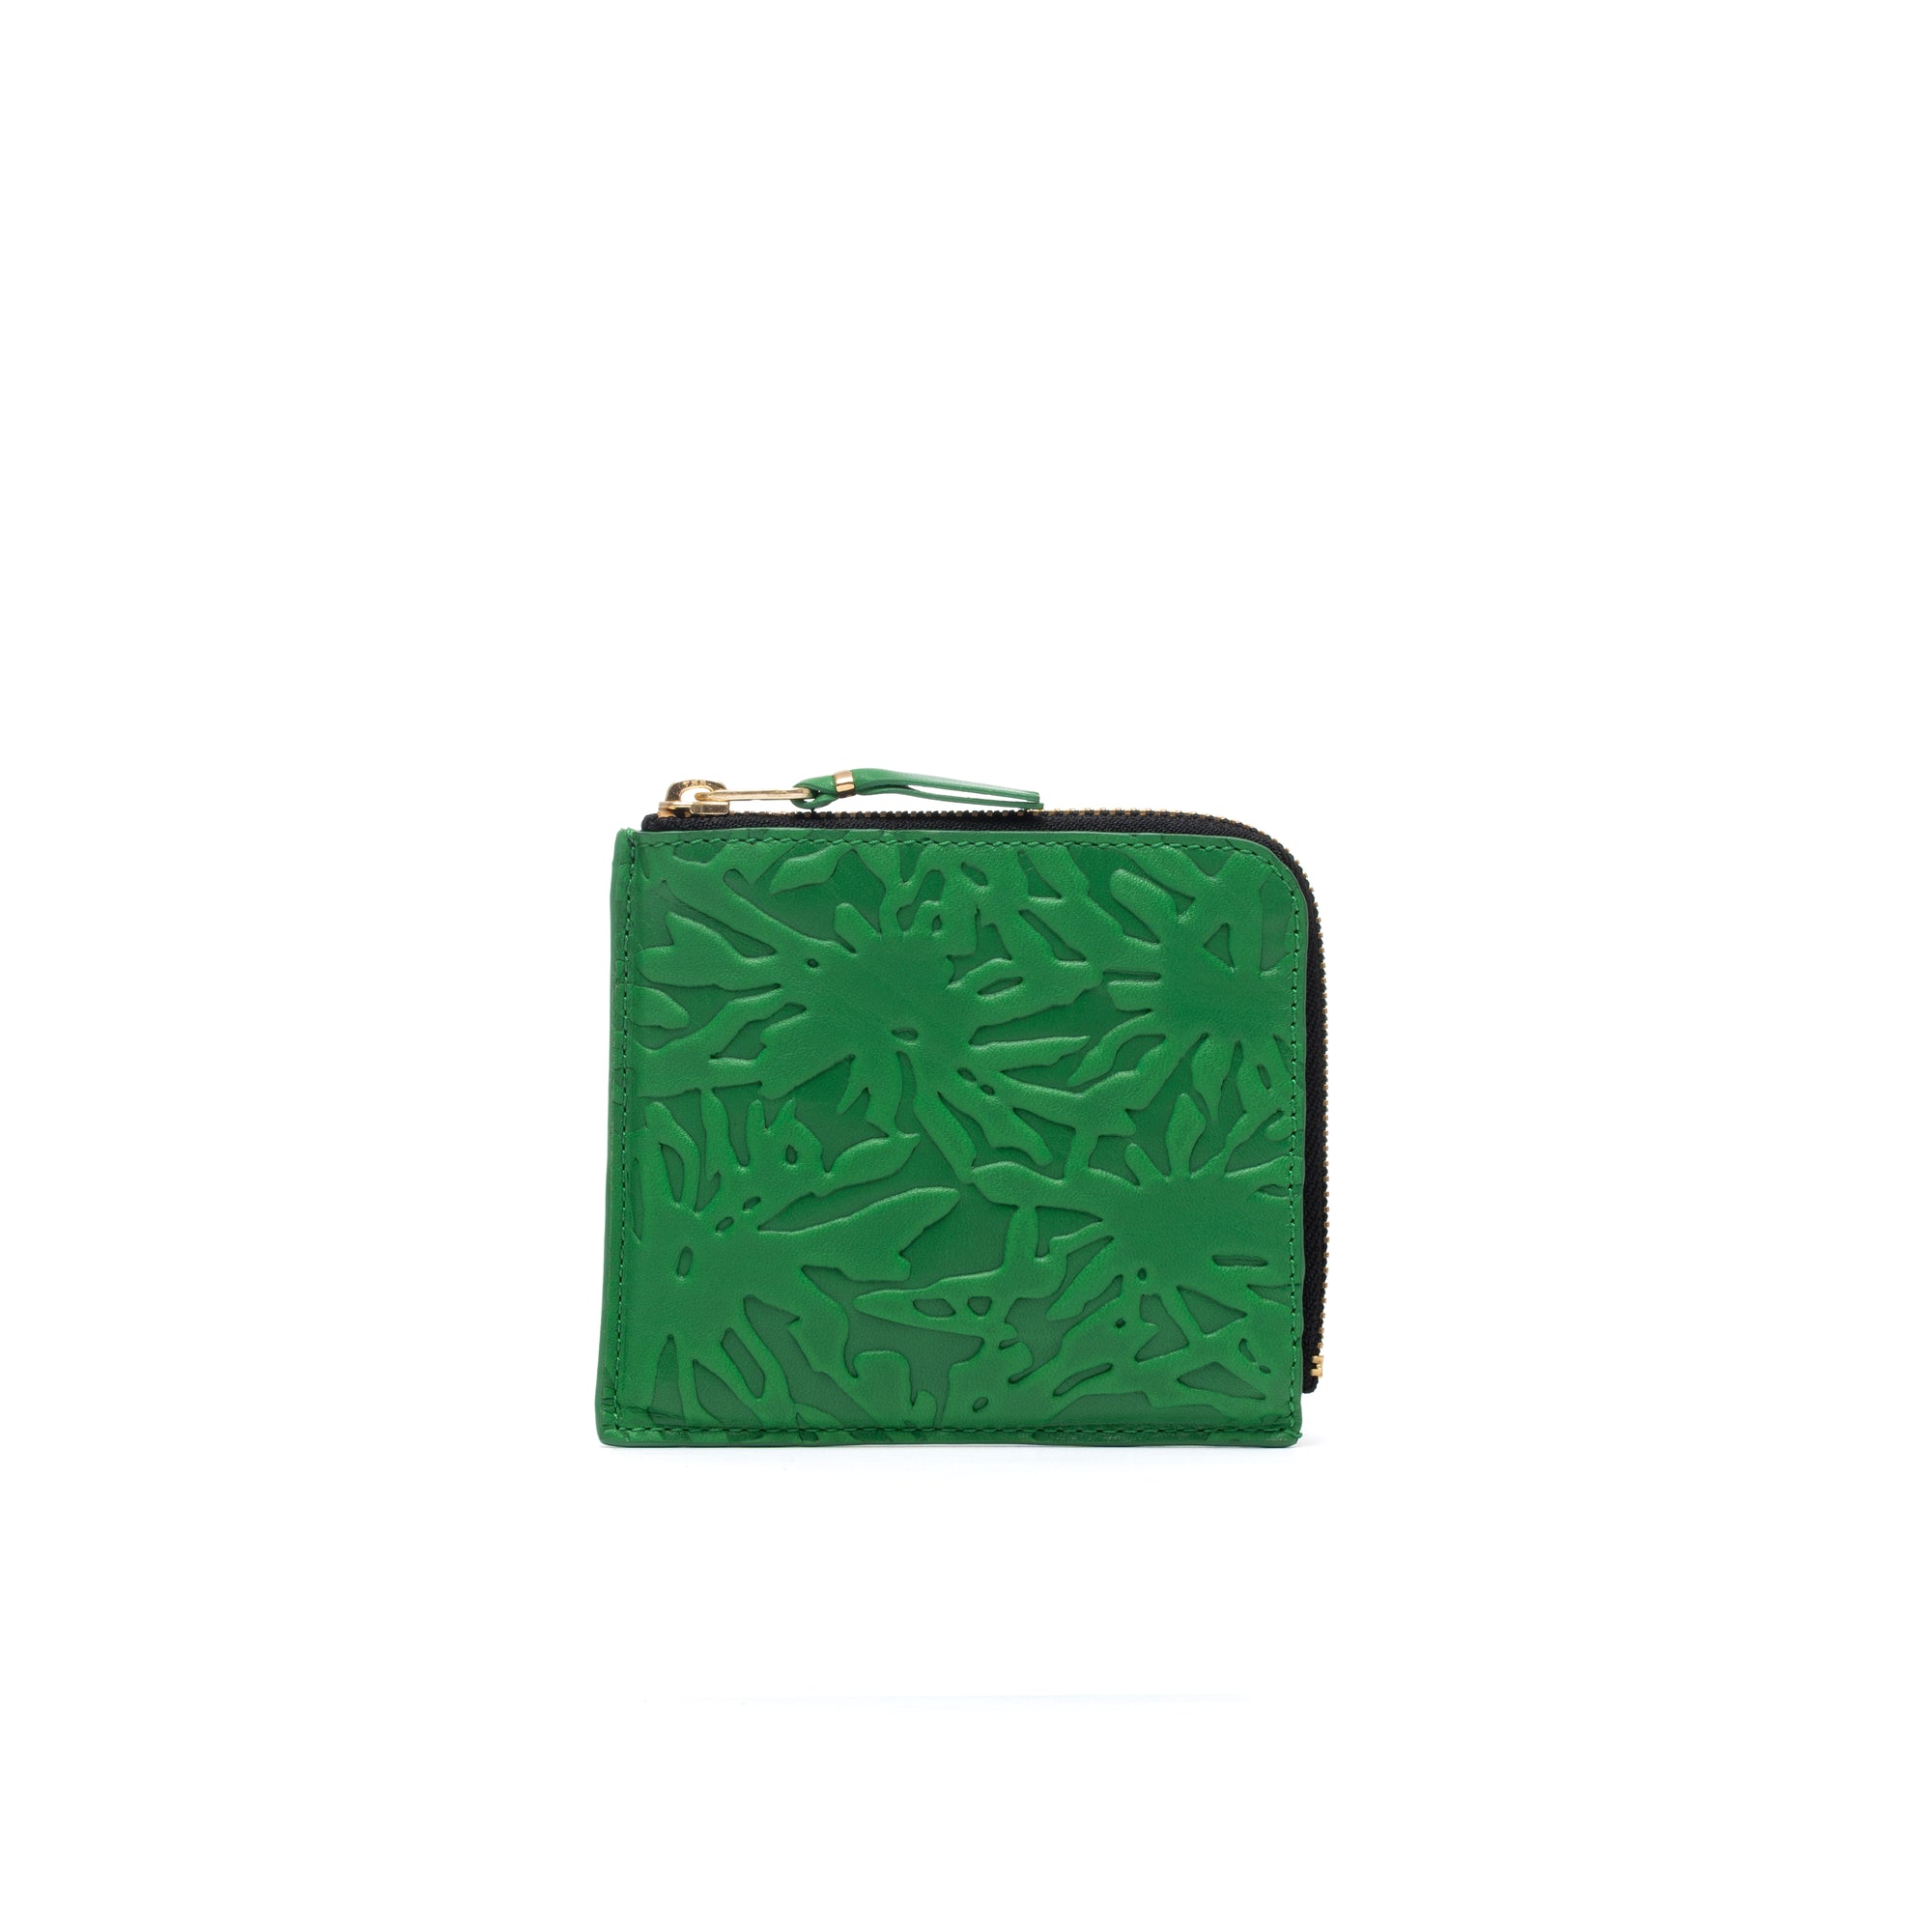 CDG WALLET - Embossed Forest - (SA3100EF Green) view 1